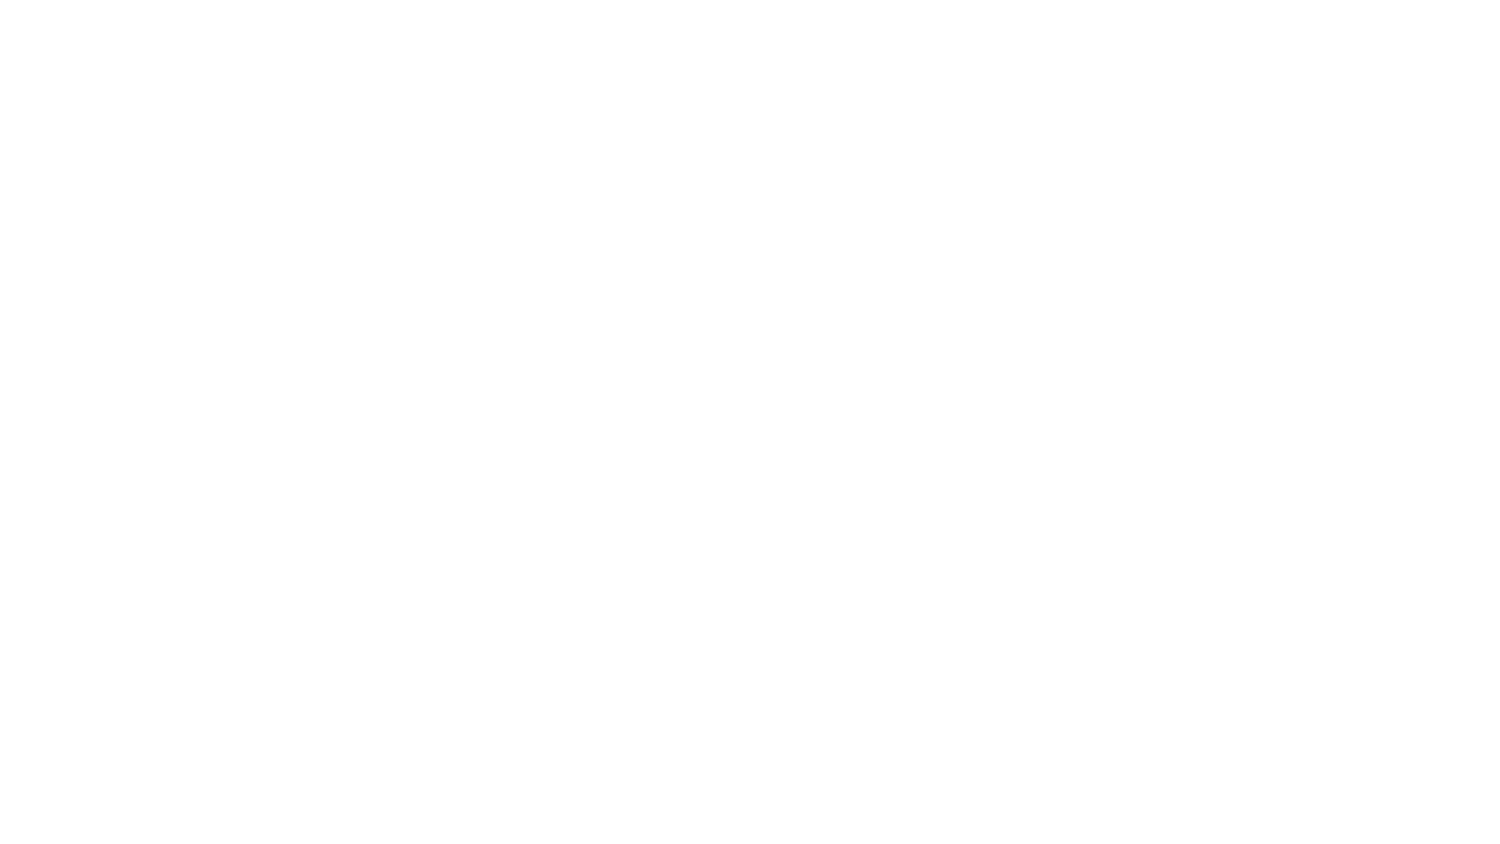 The Pines